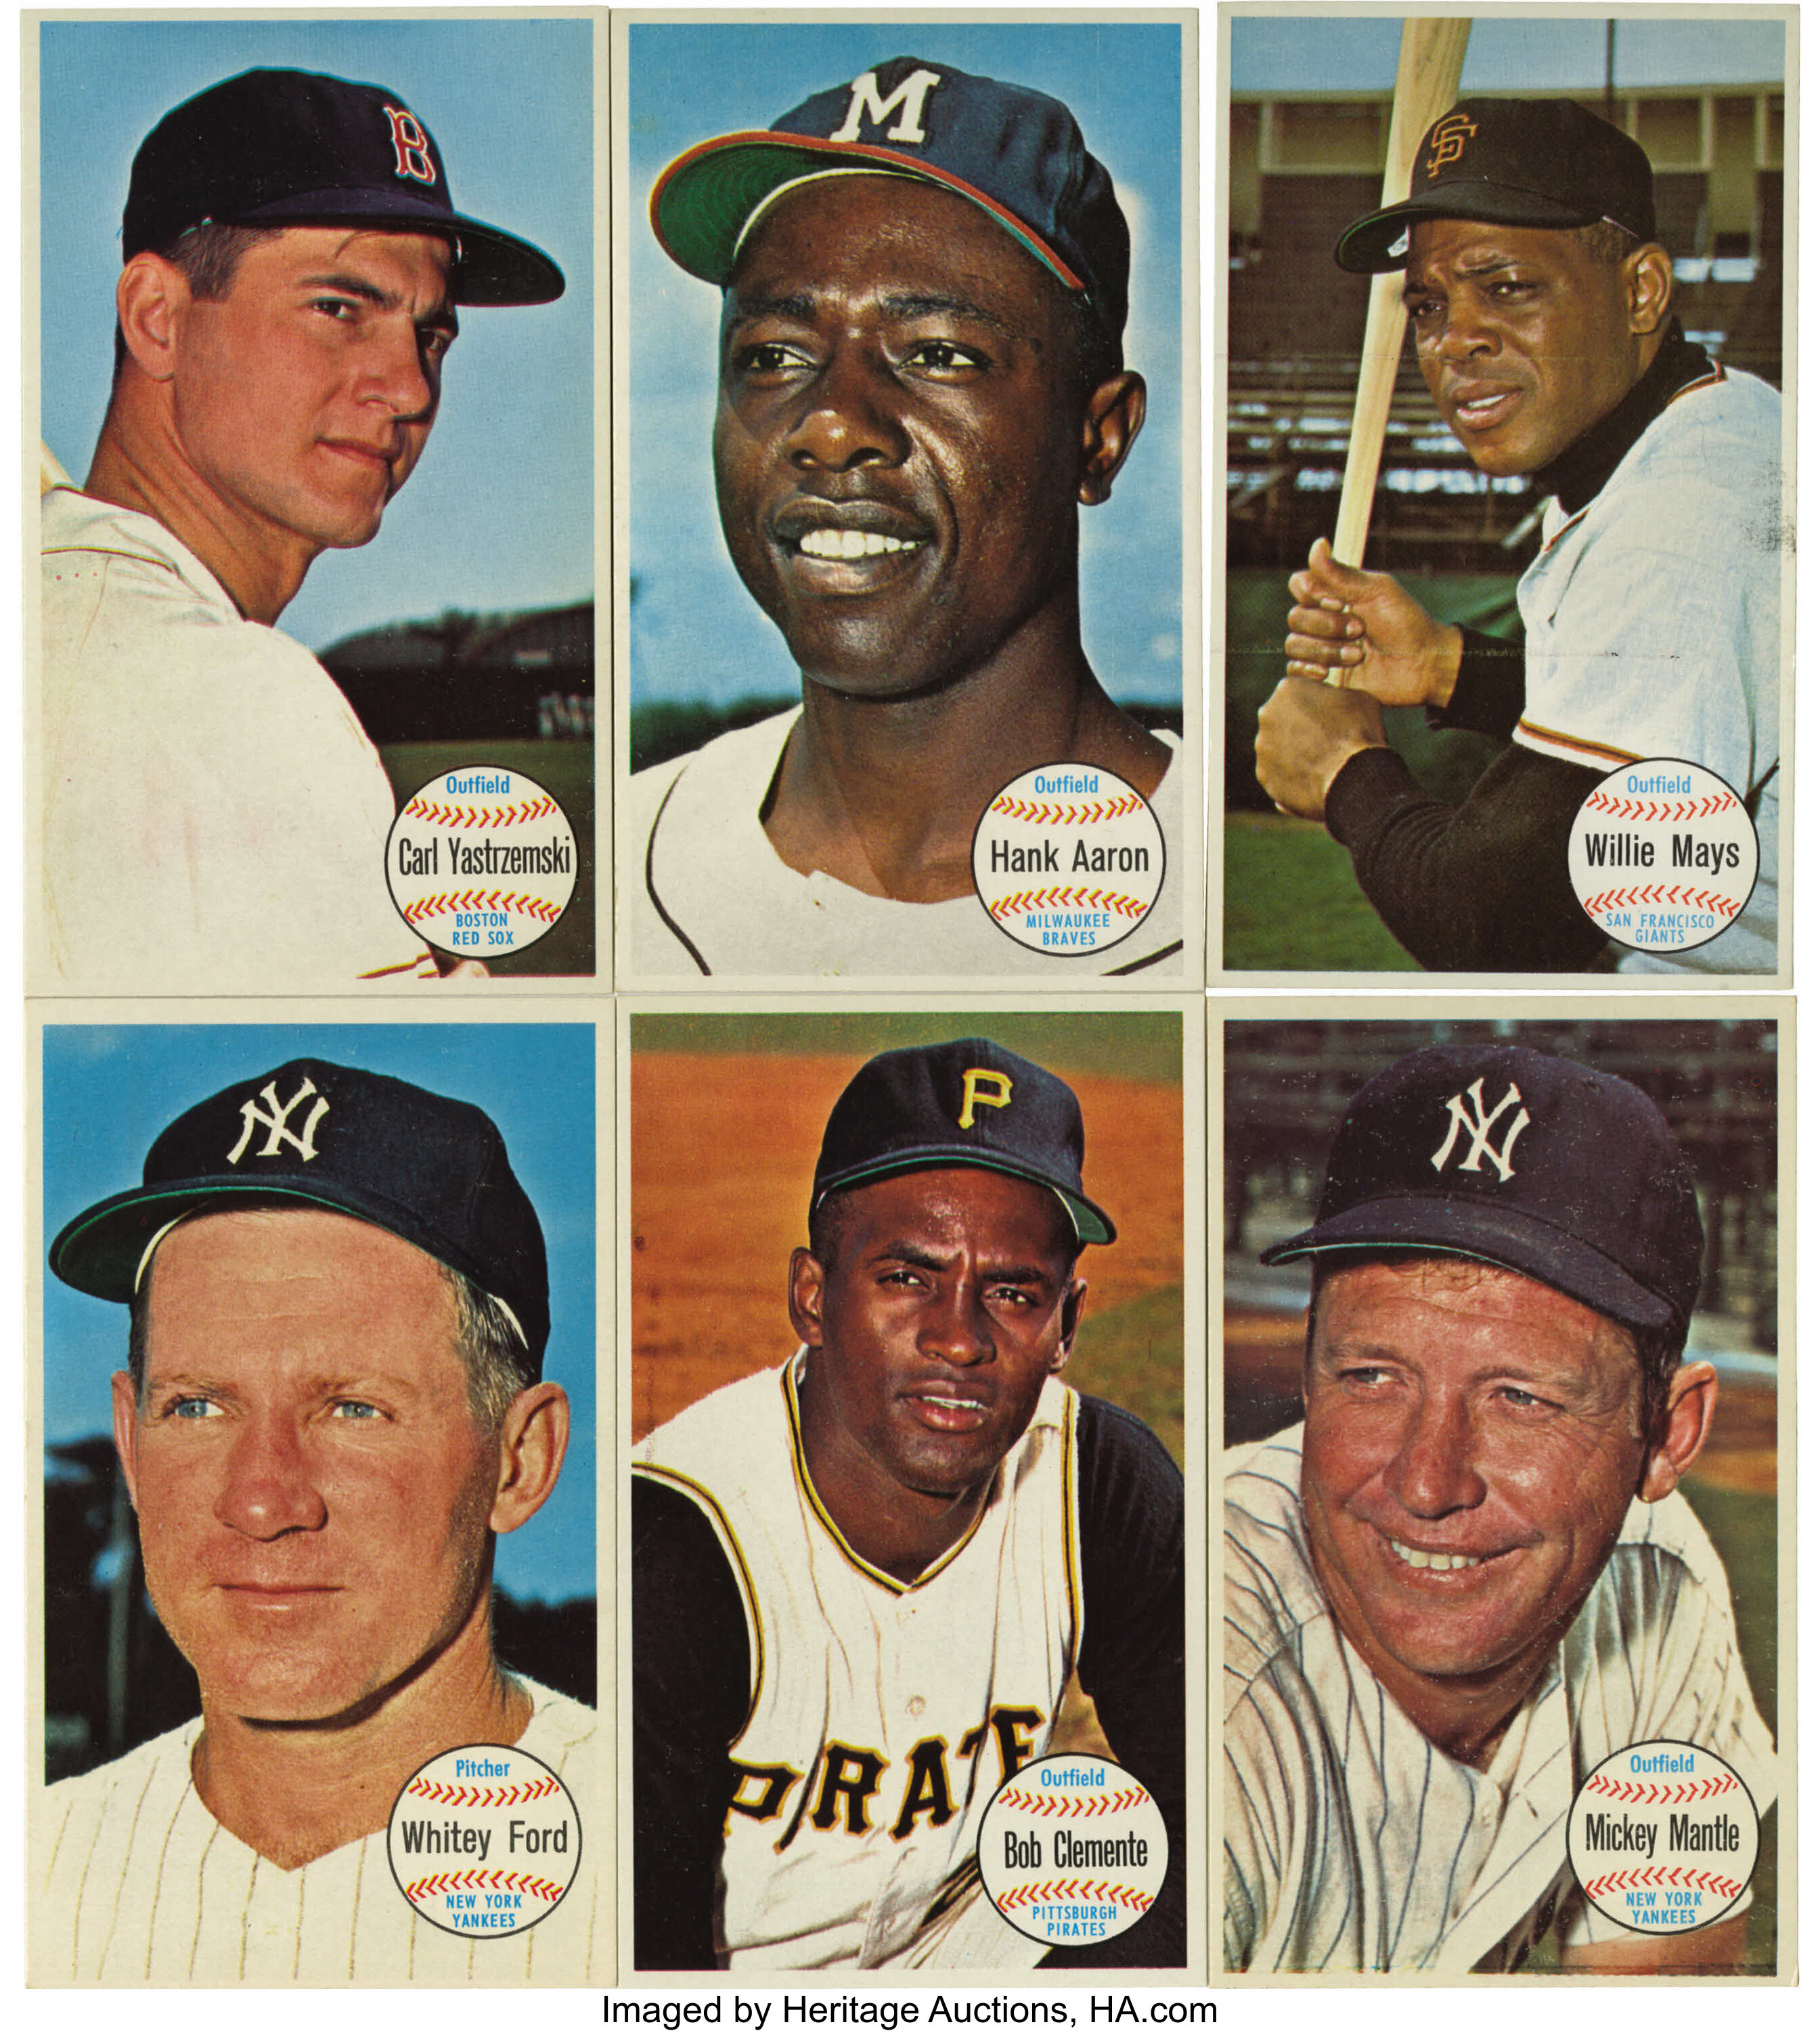 1964 Topps Giants Baseball Group Lot of 6. Nice group from the